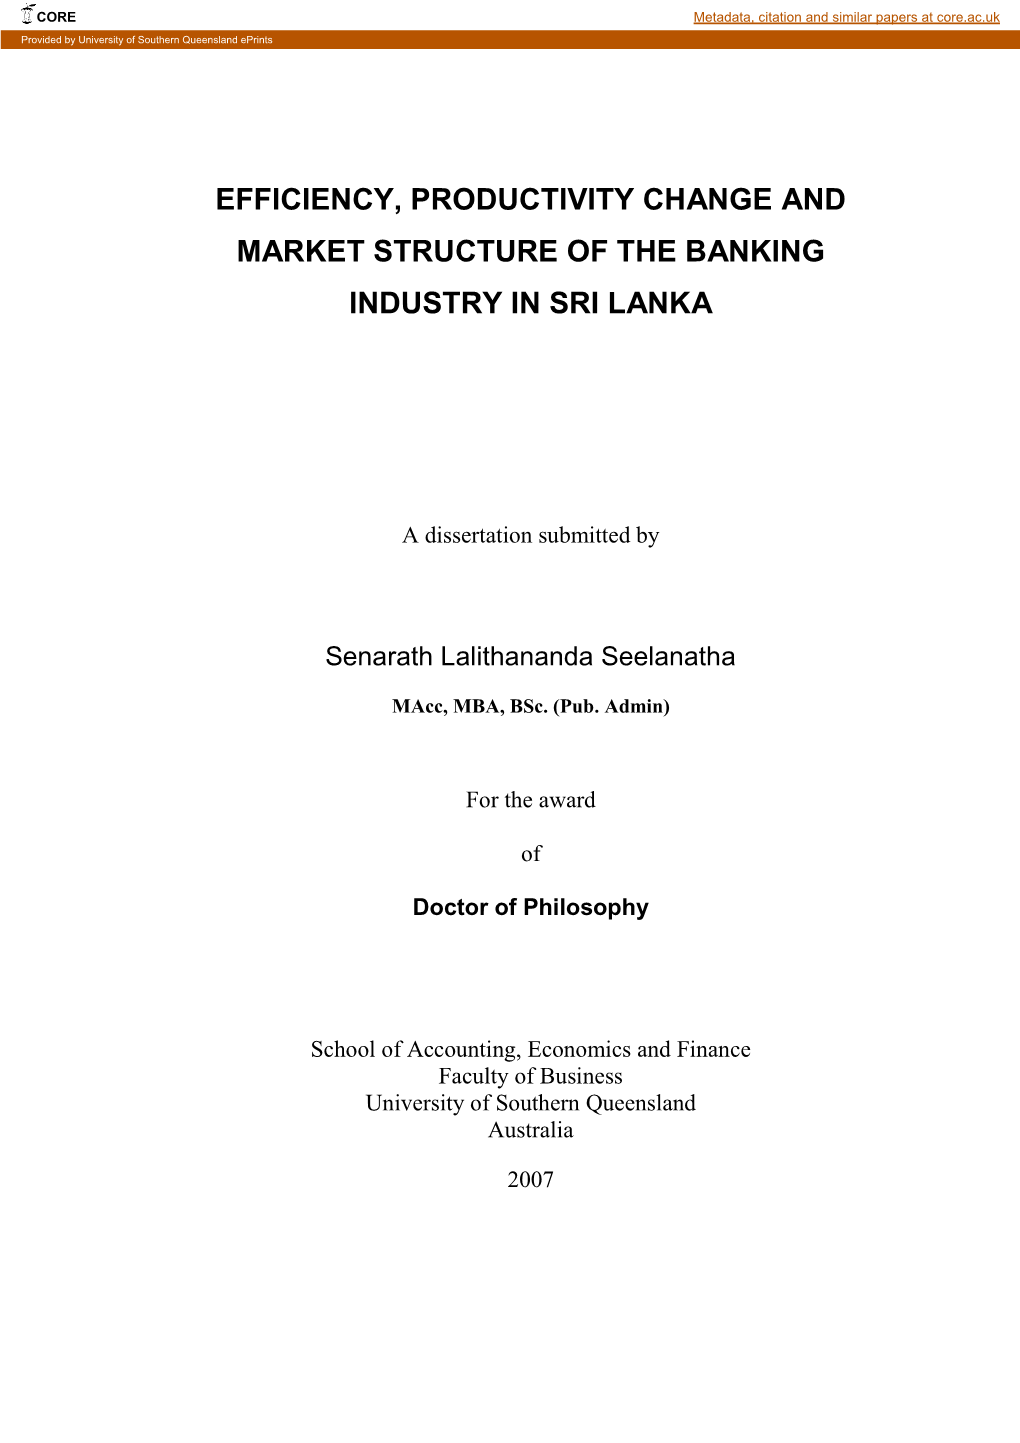 Deregulation, Market Structure and the Banking Industry in Sri Lanka